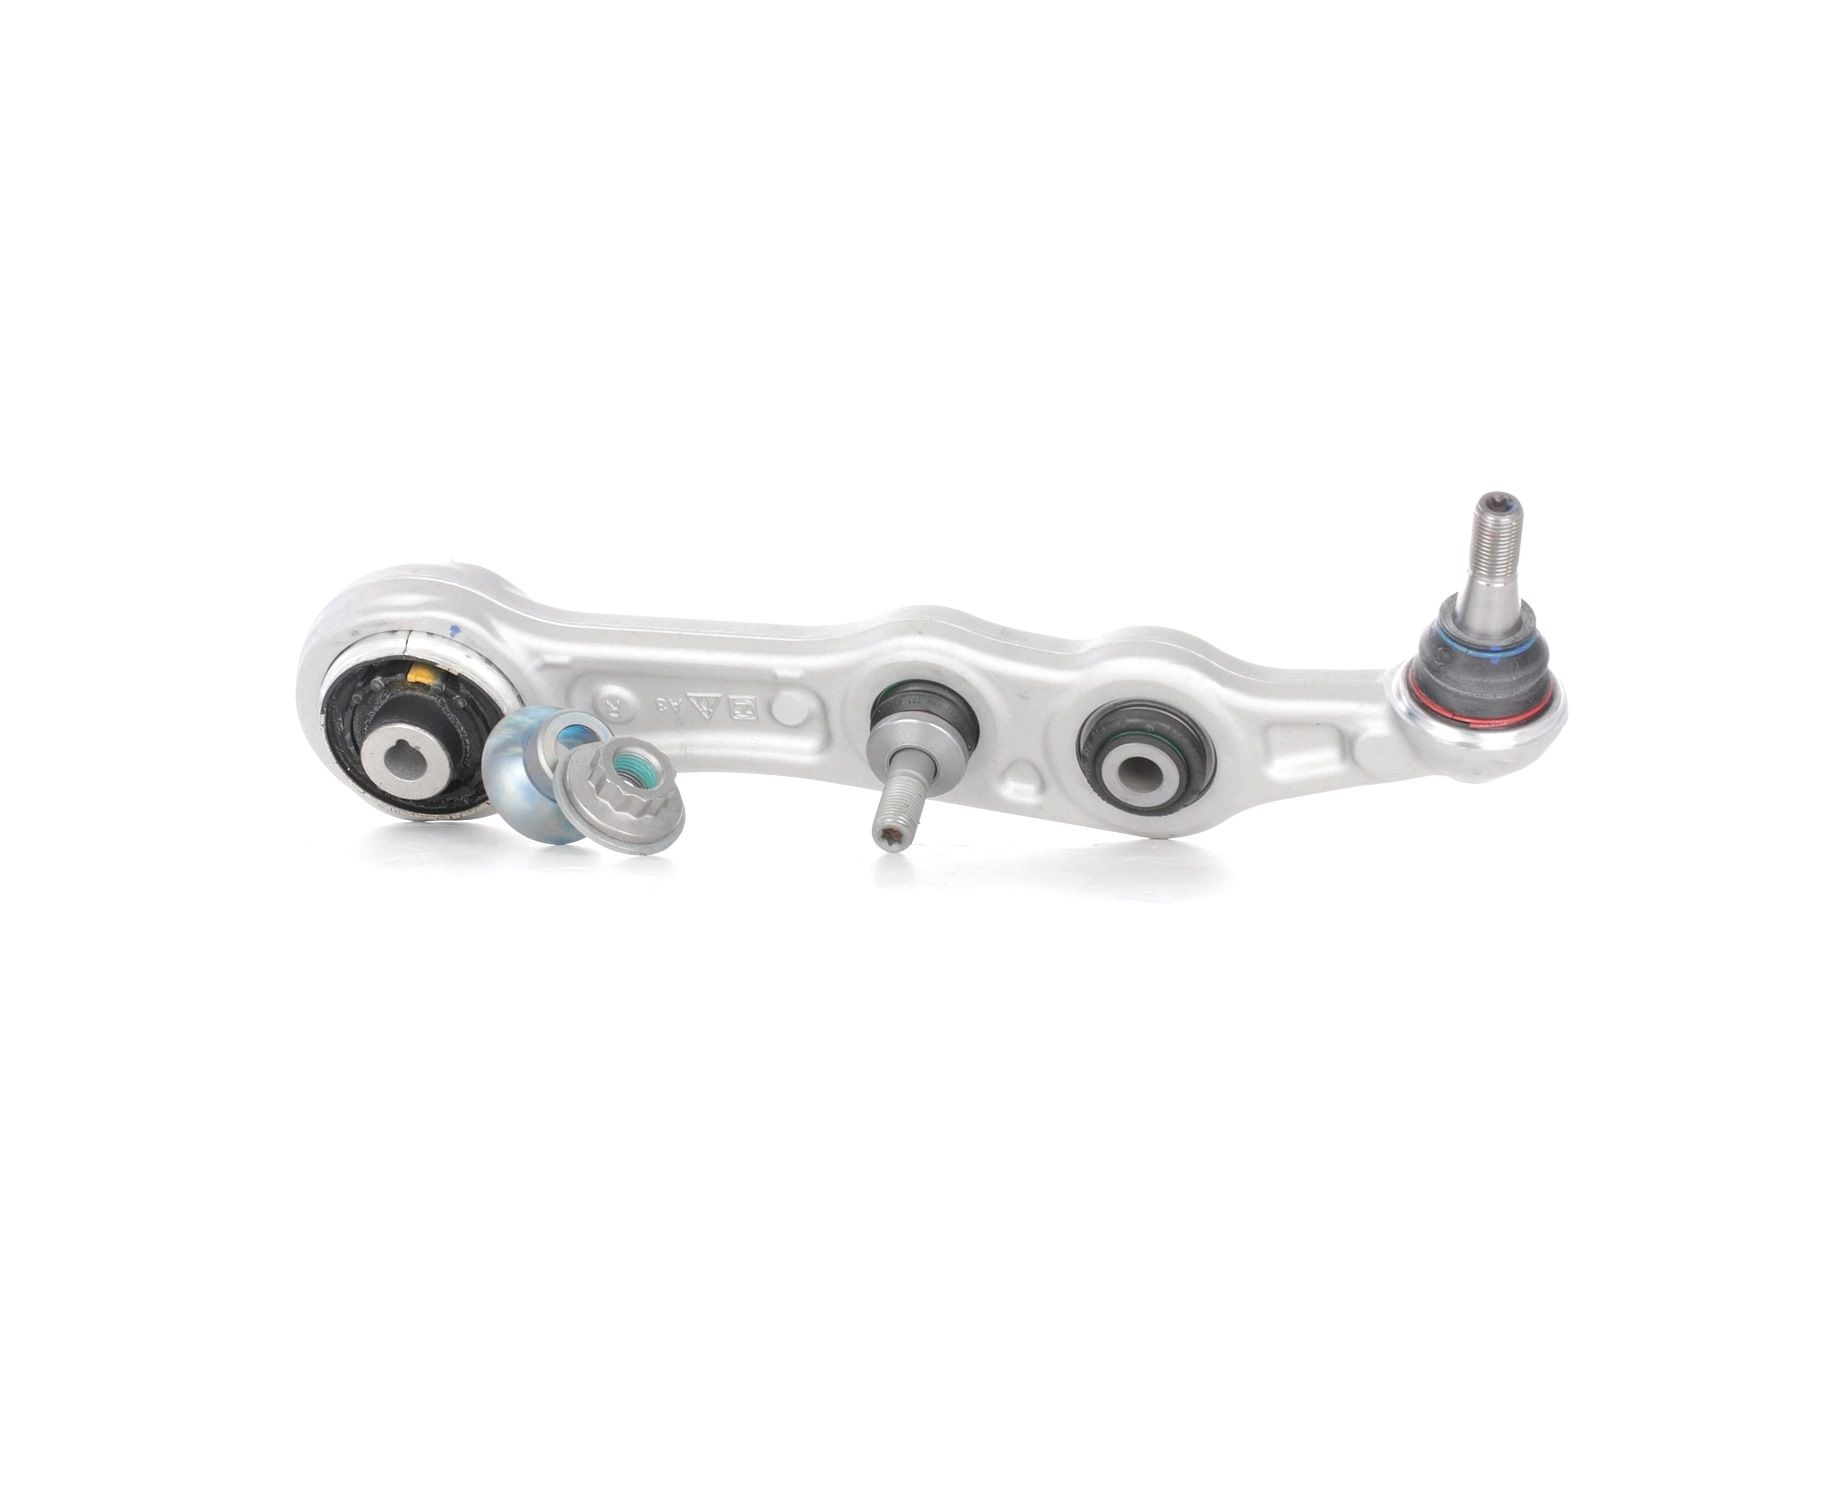 LEMFÖRDER Control arms rear and front Mercedes S213 new 39585 01